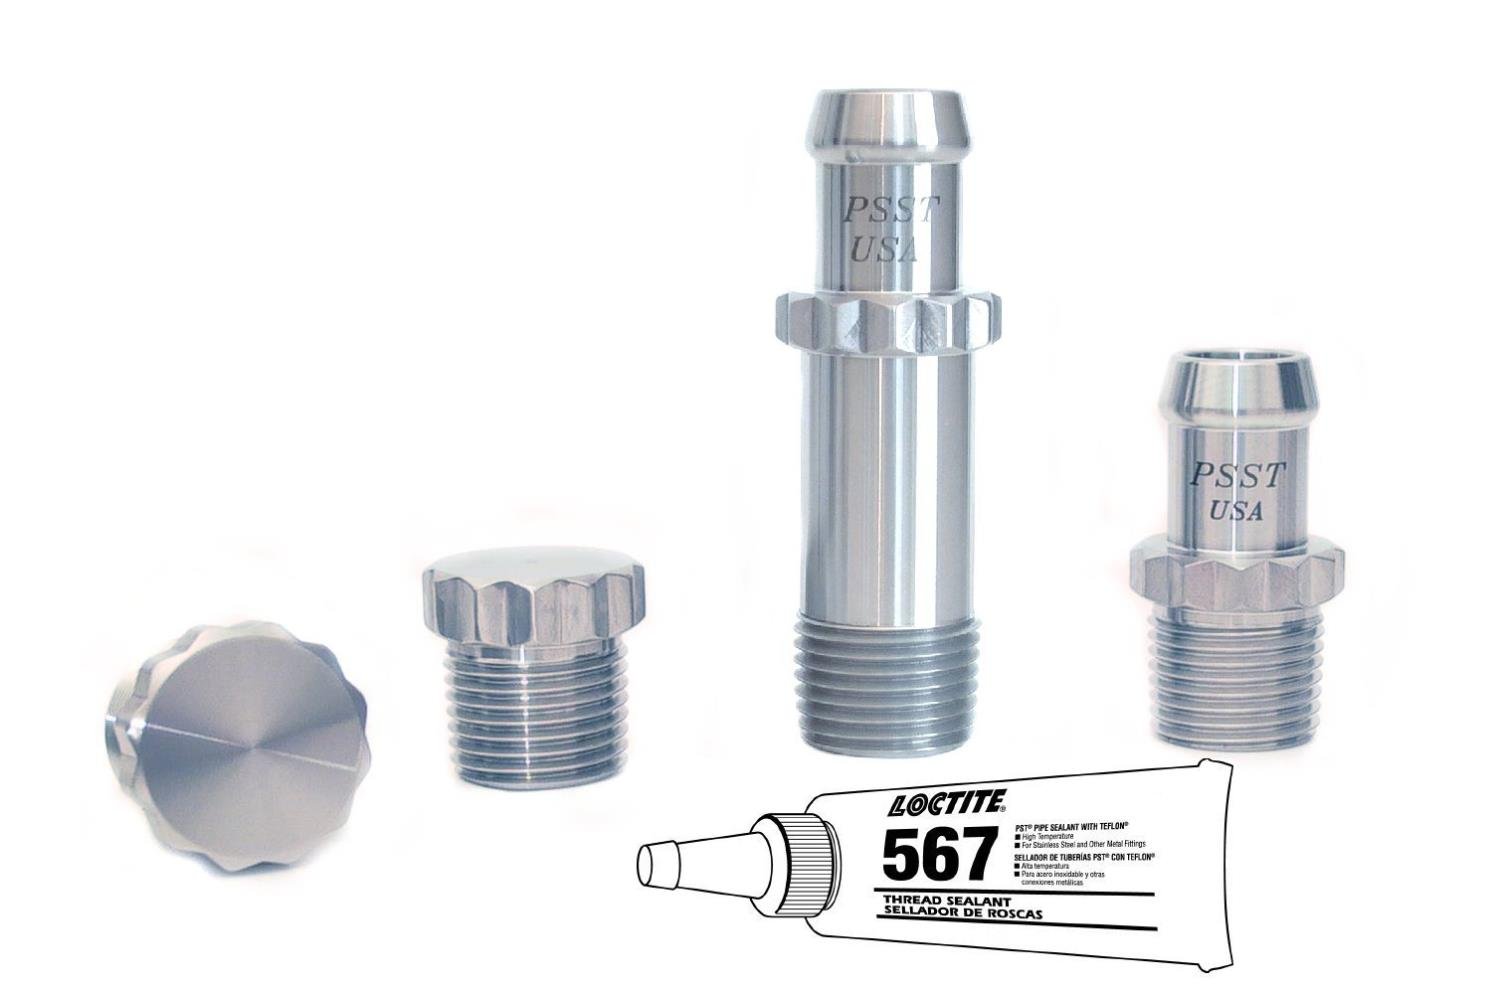 Koolkitz Fitting Kit Includes: (2) 1/2 in. NPT x 5/8 in. Hose Barb Fittings, (2) 1/2 in. NPT Plug Fittings [Polished Finish]